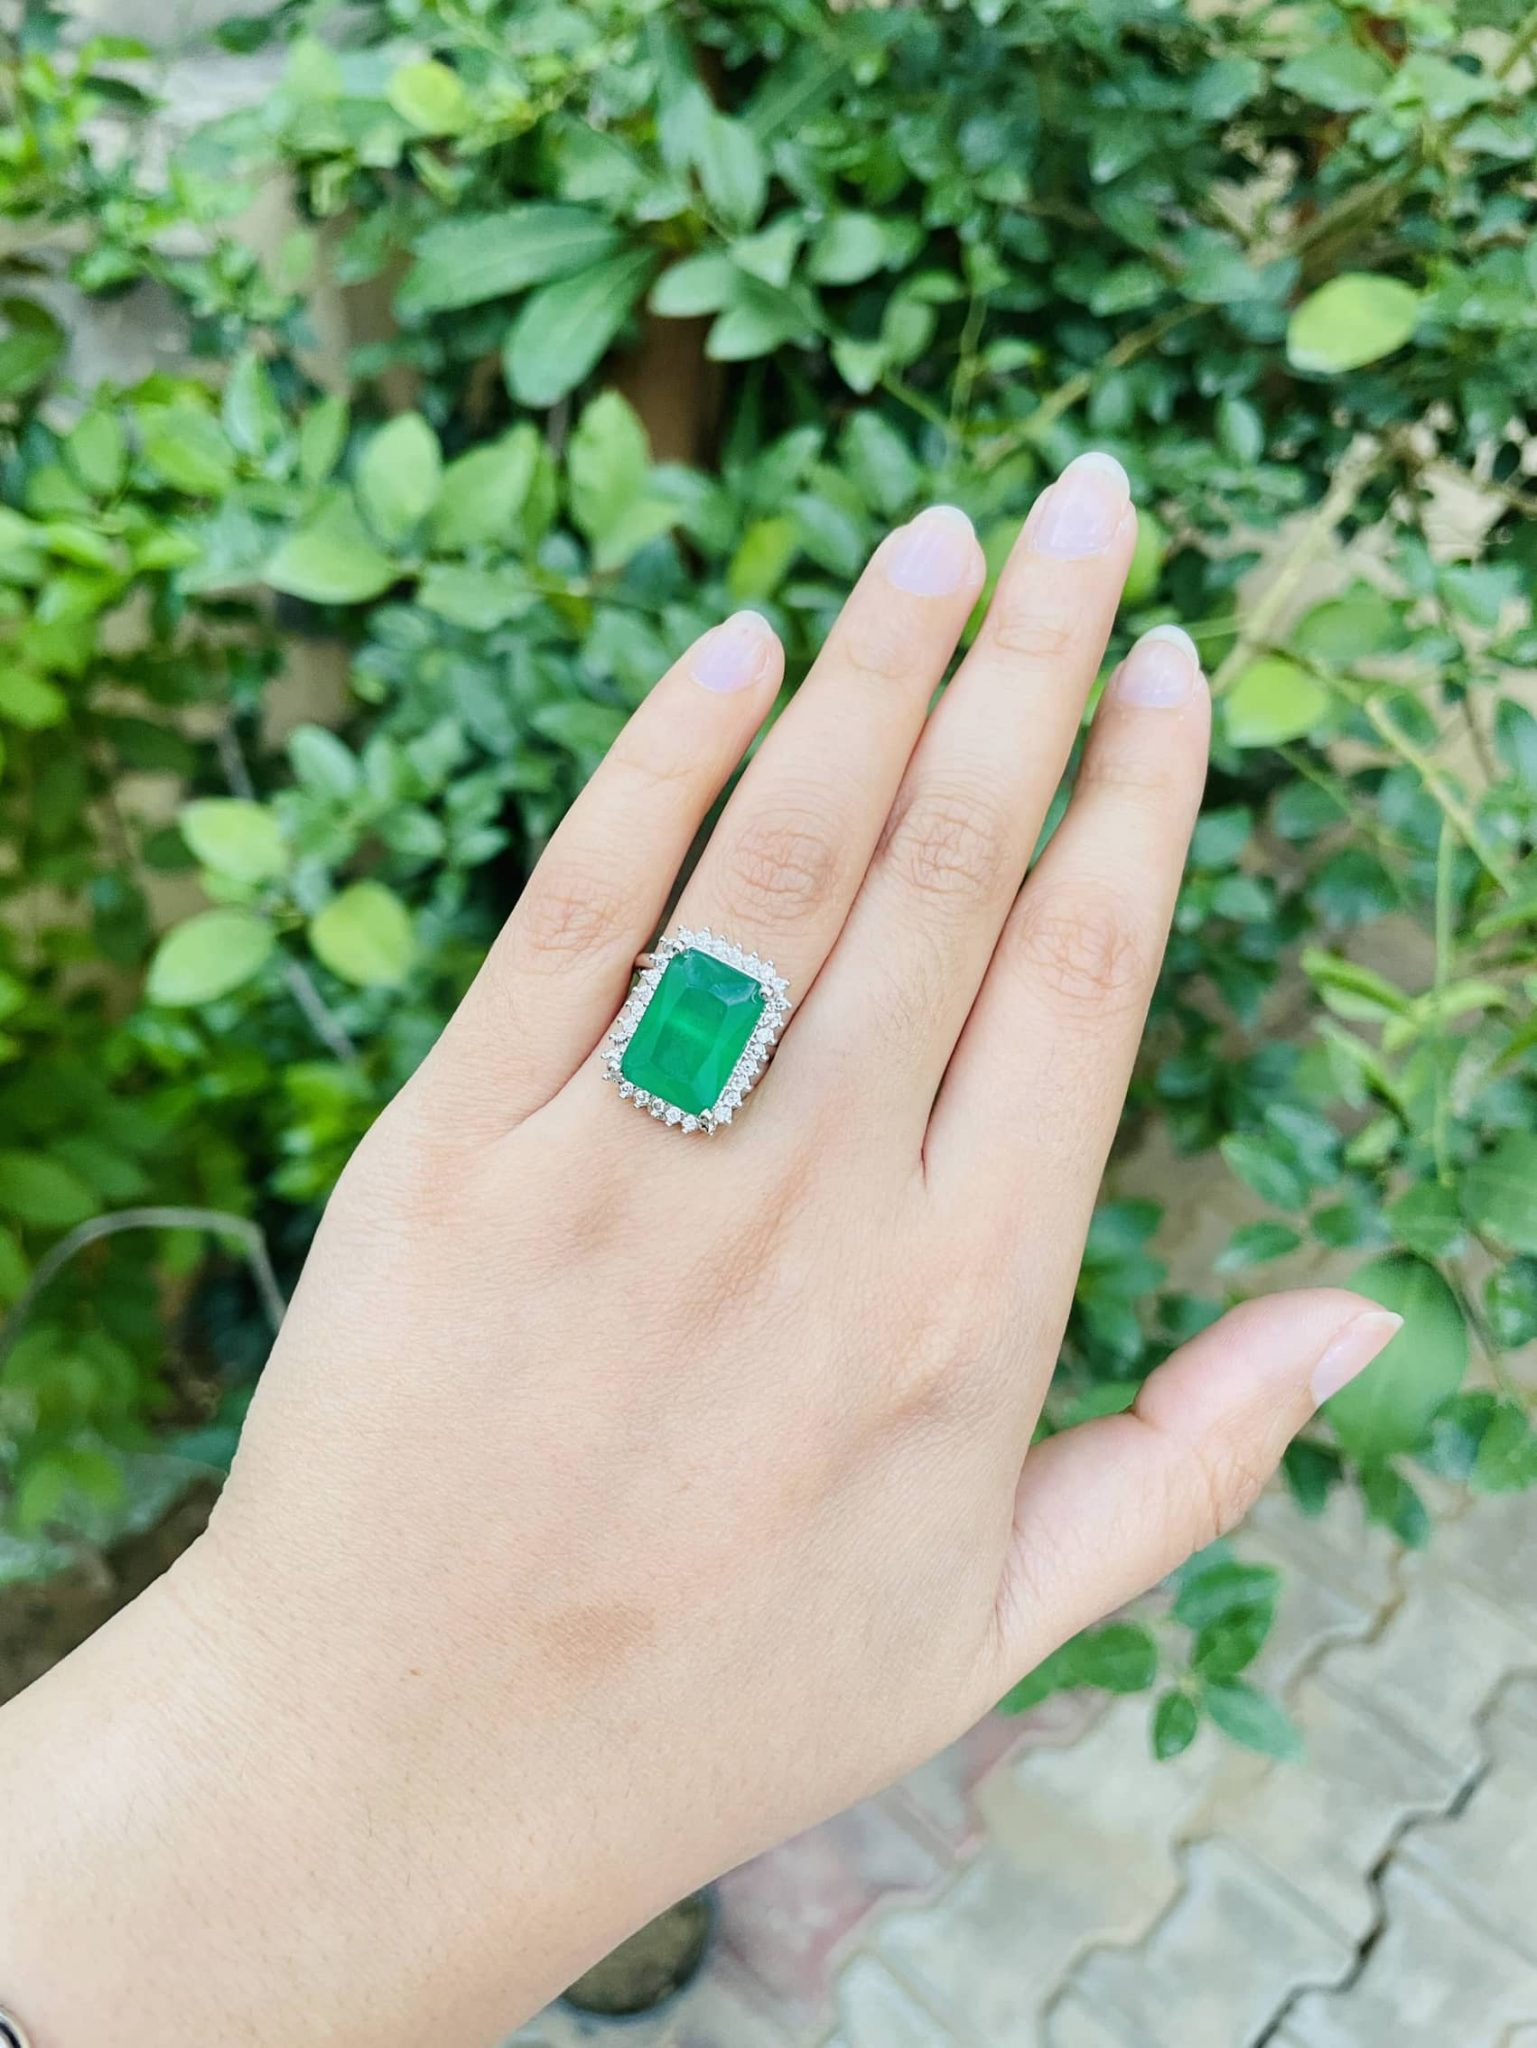 Share more than 164 green stone ring